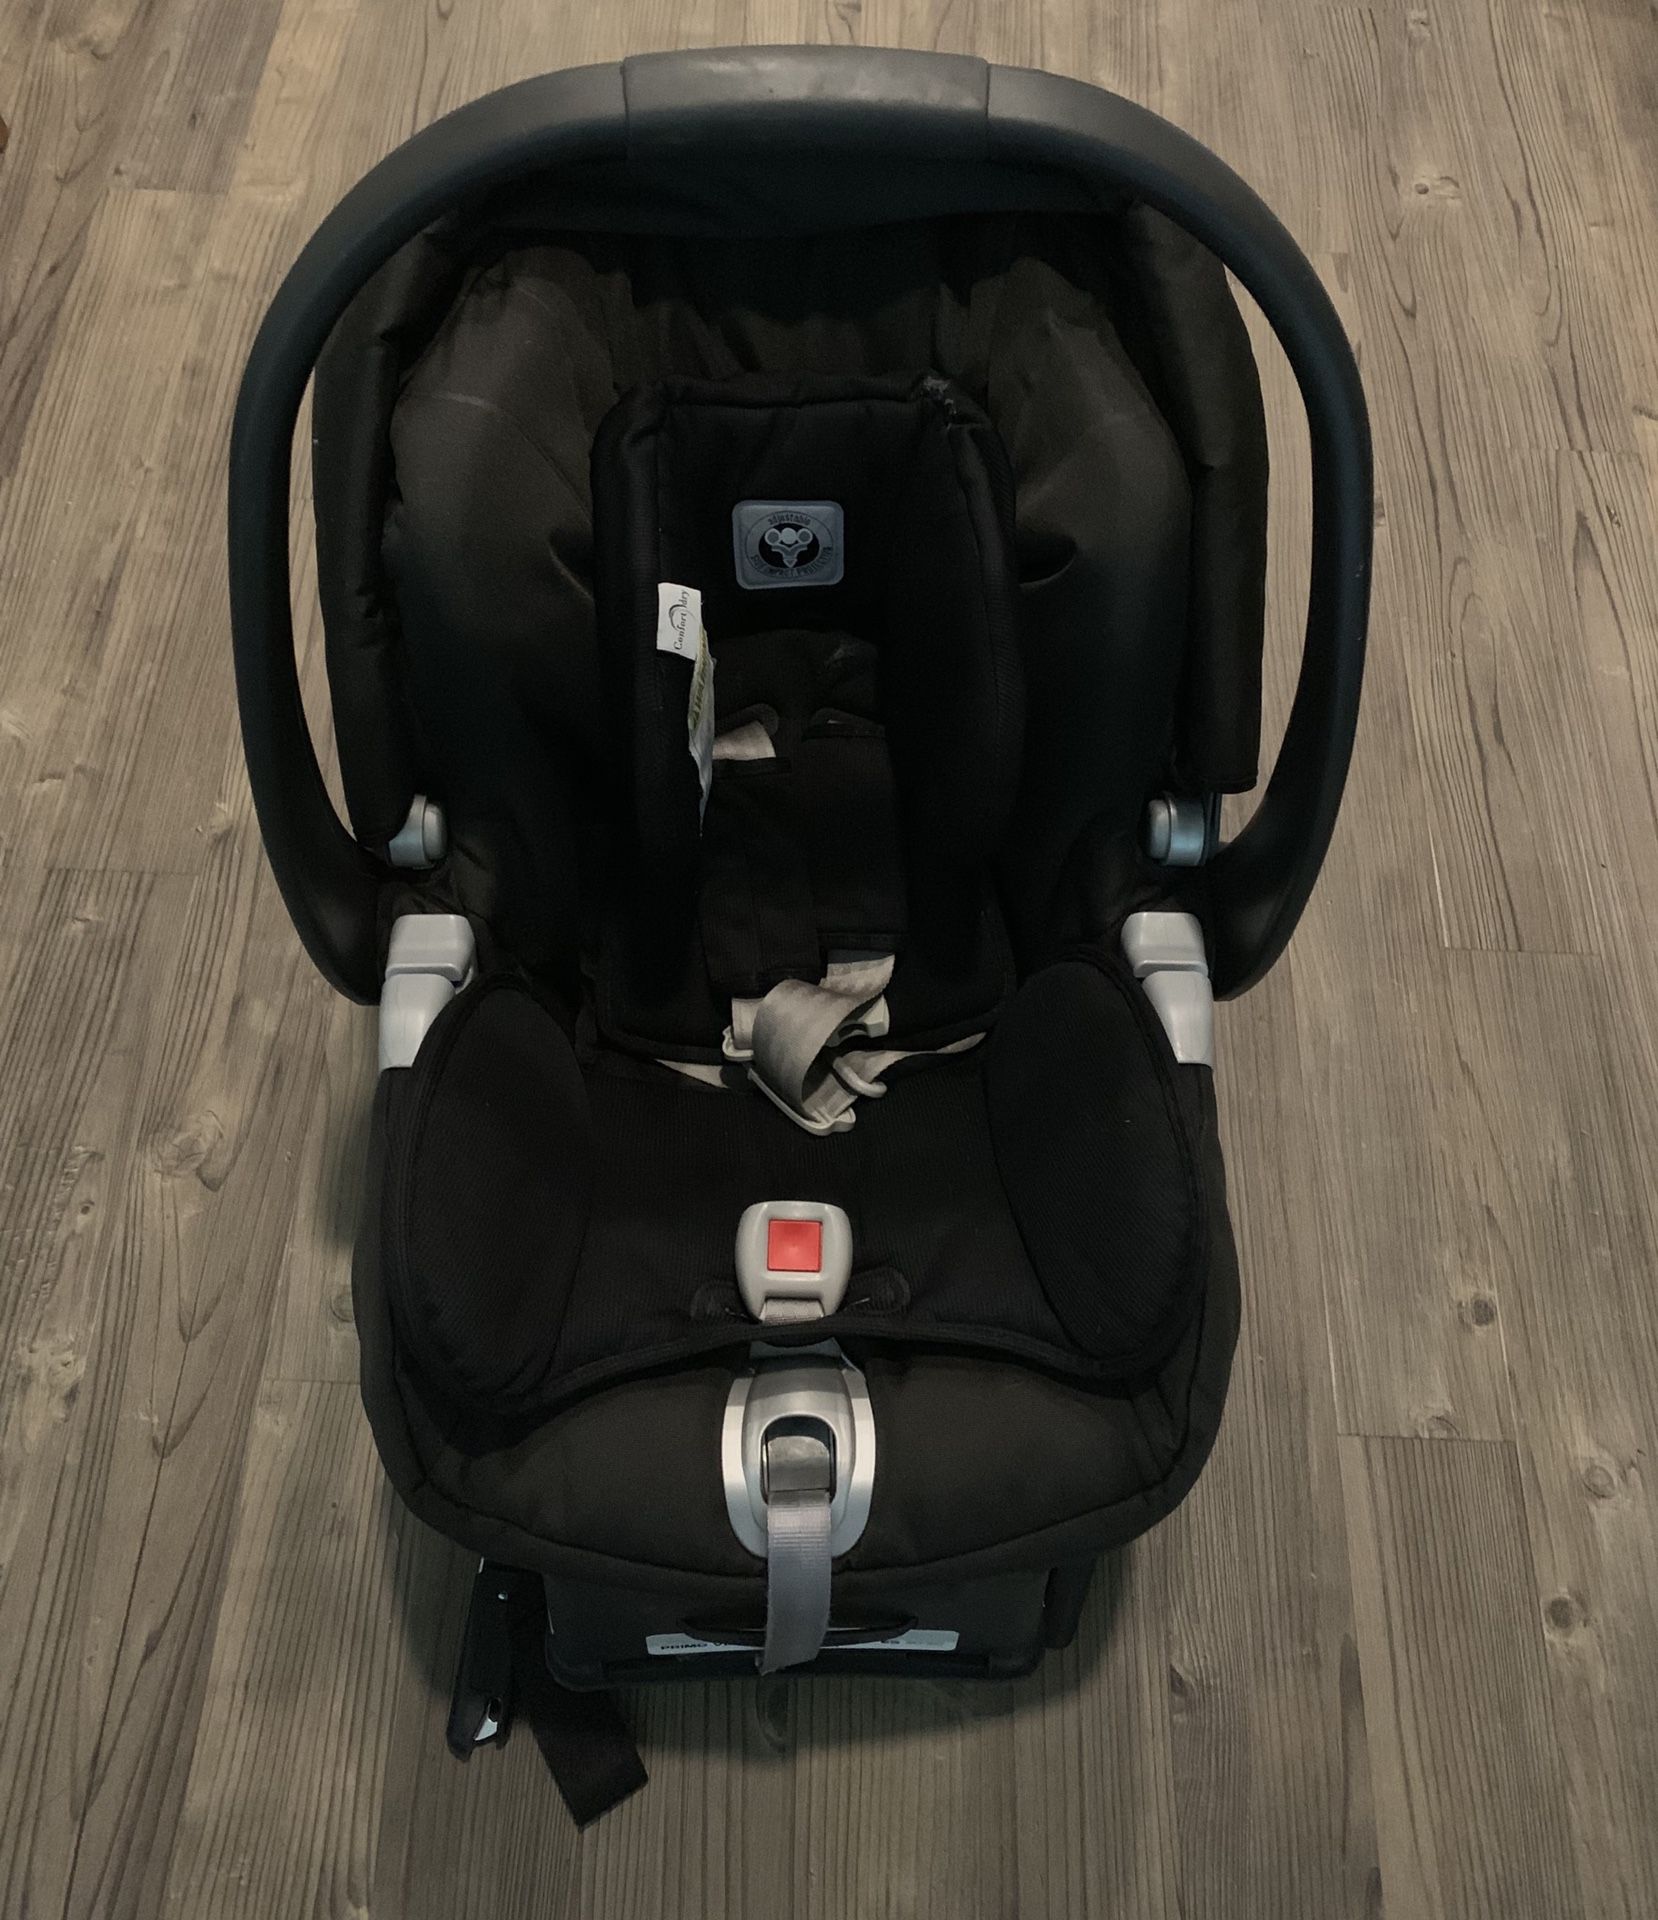 Peg Perego Infant Car Seat & Toddler Bed (NOT FREE)